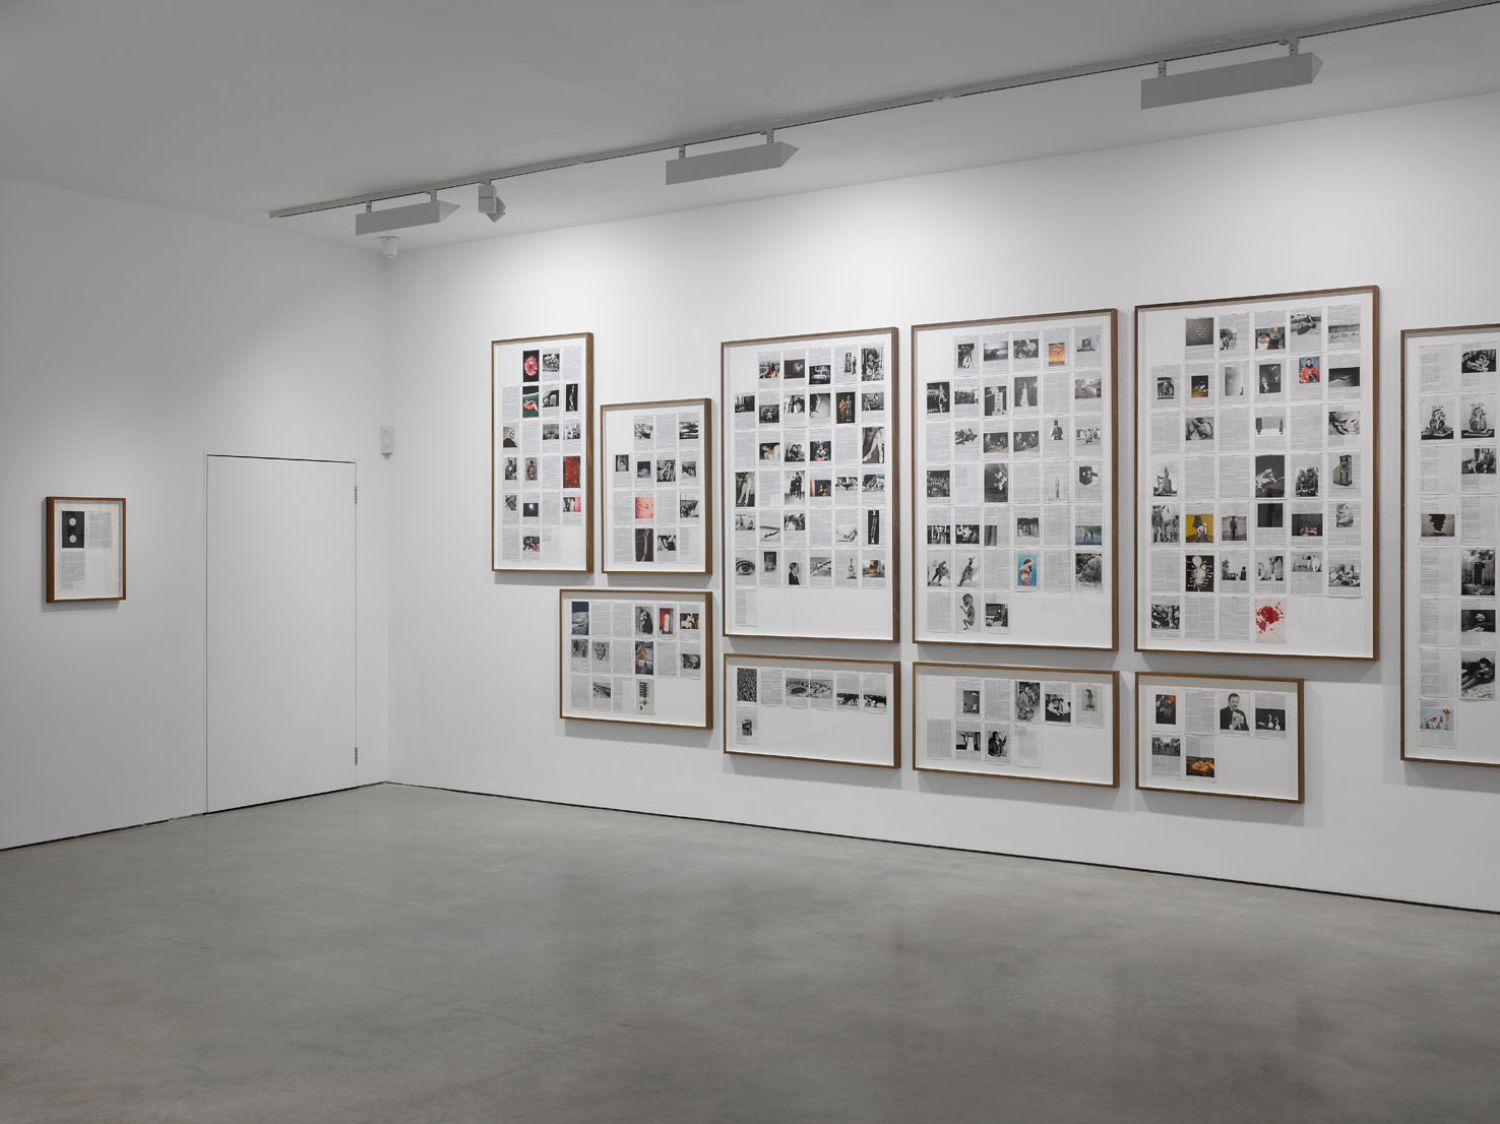  Cross Section of a Revolution, Lisson Gallery, London, Installation View, 2015, Image © Lisson Gallery, London 